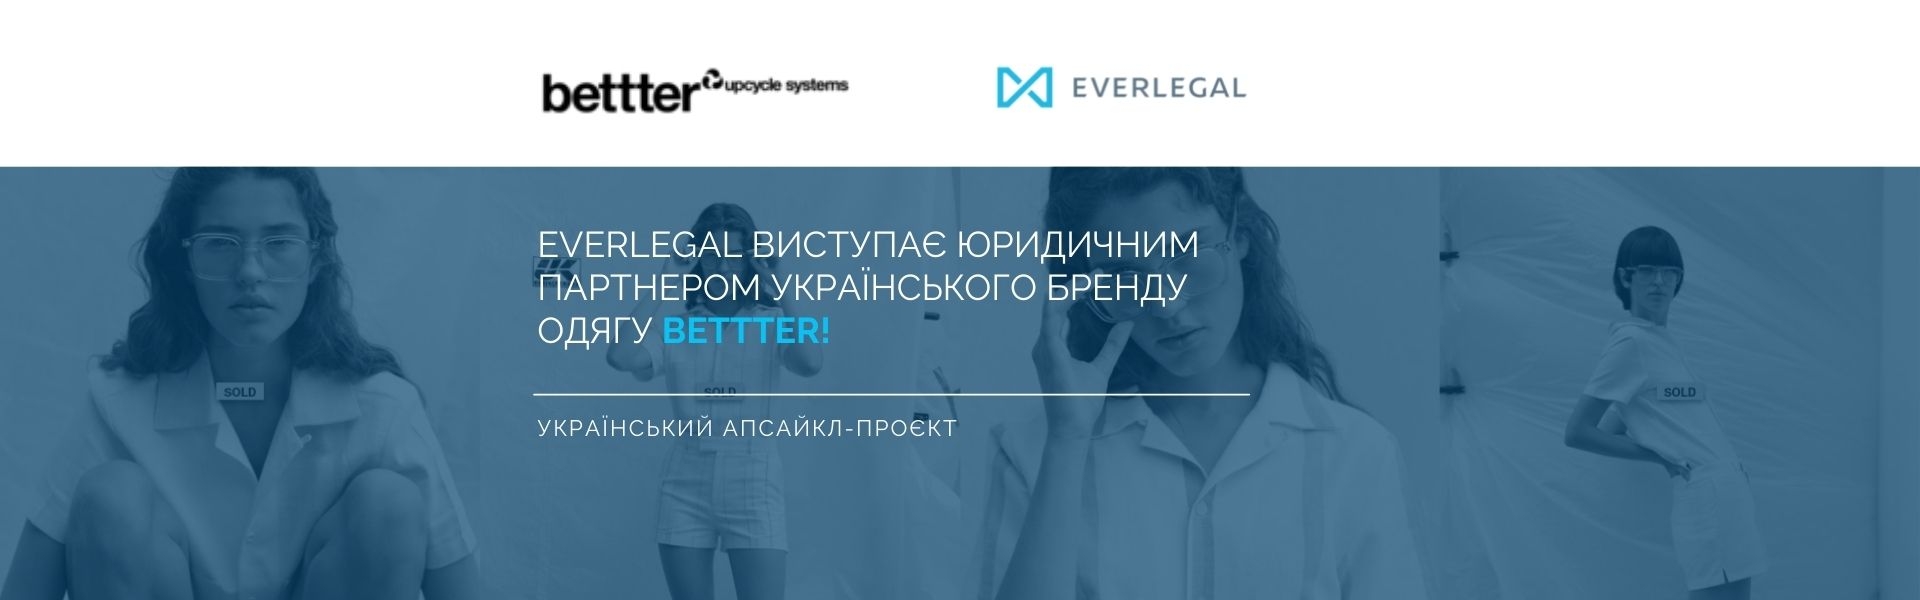 EVERLEGAL acts as a legal partner to the Ukrainian clothing brand Bettter